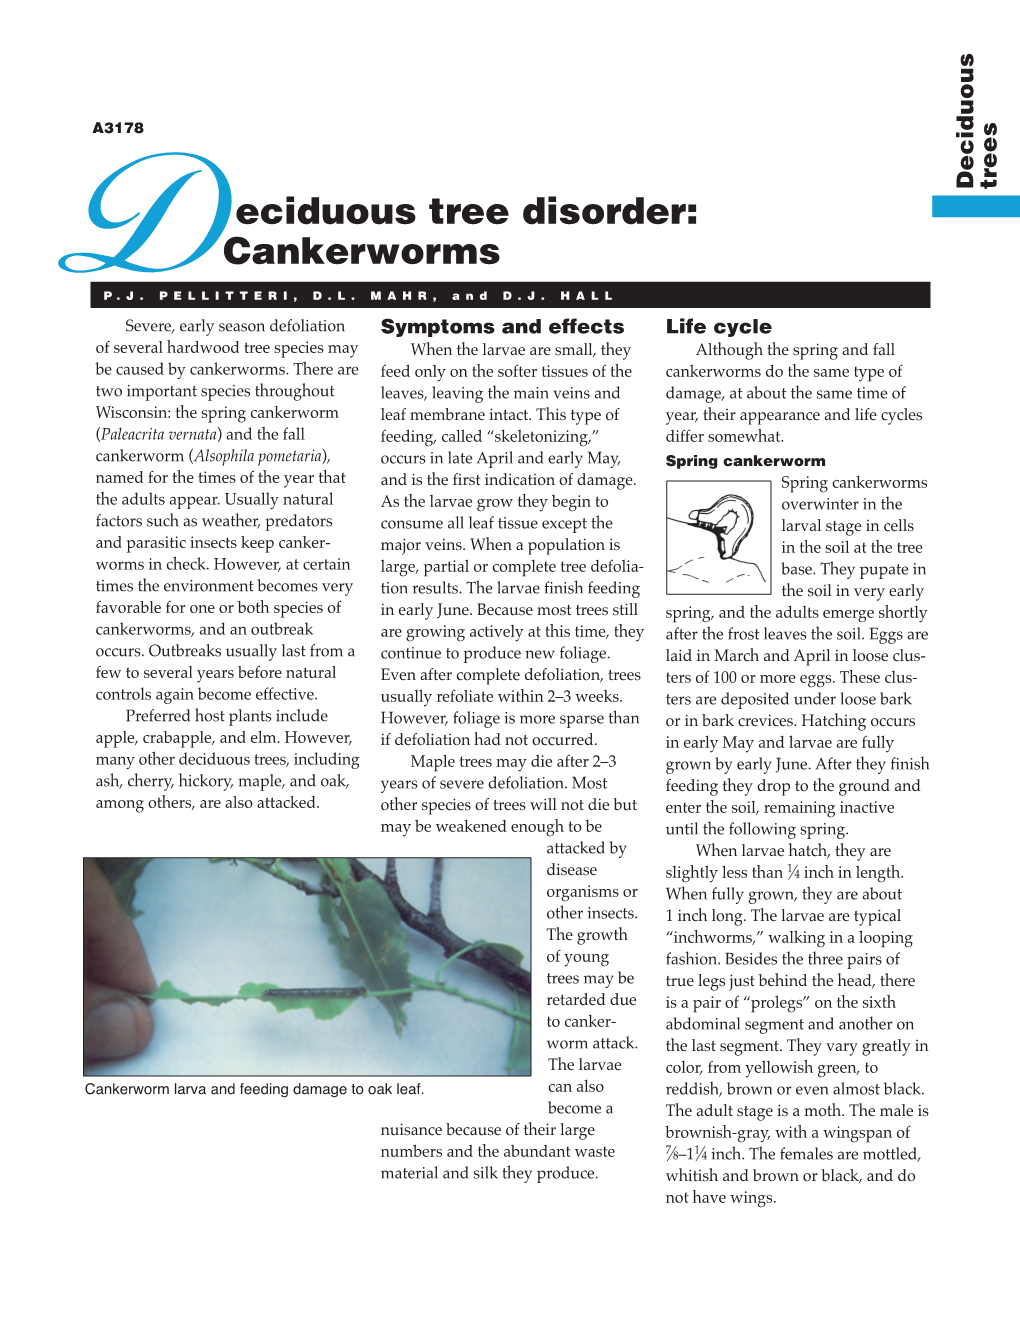 Deciduous Tree Disorder: Cankerworms (A3178)